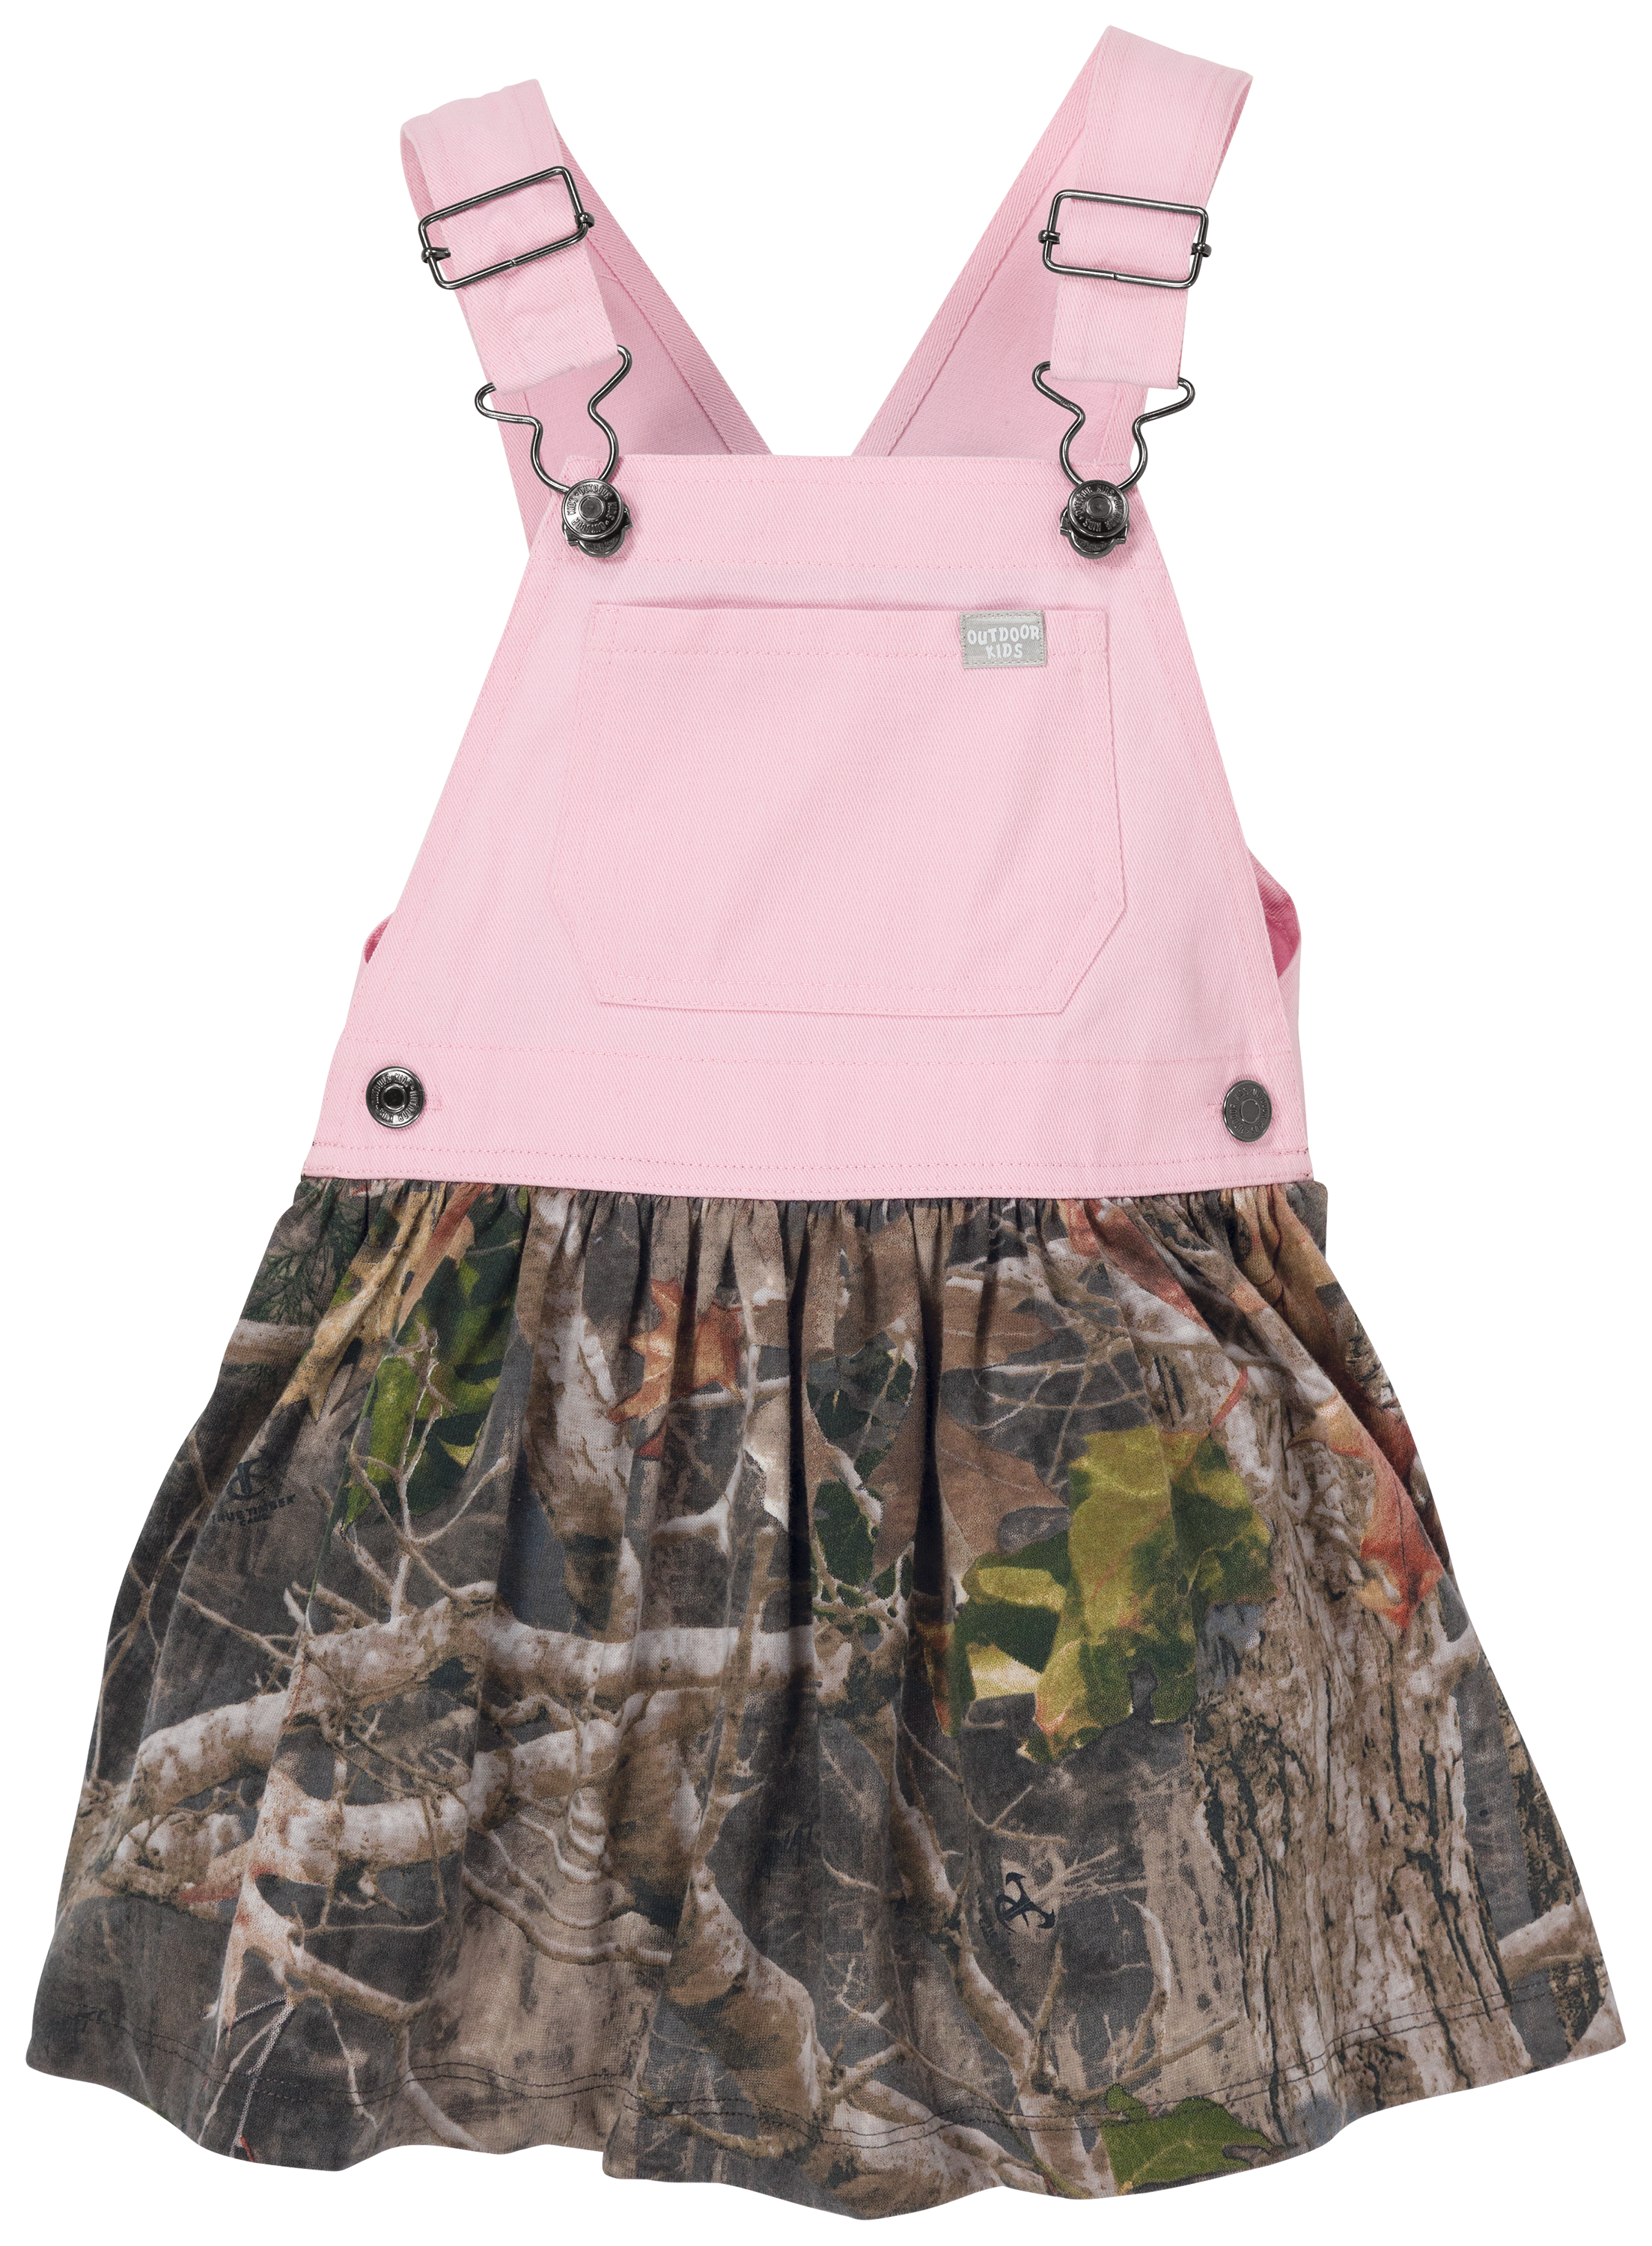 Bass Pro Shops Overall Dress for Babies or Toddlers